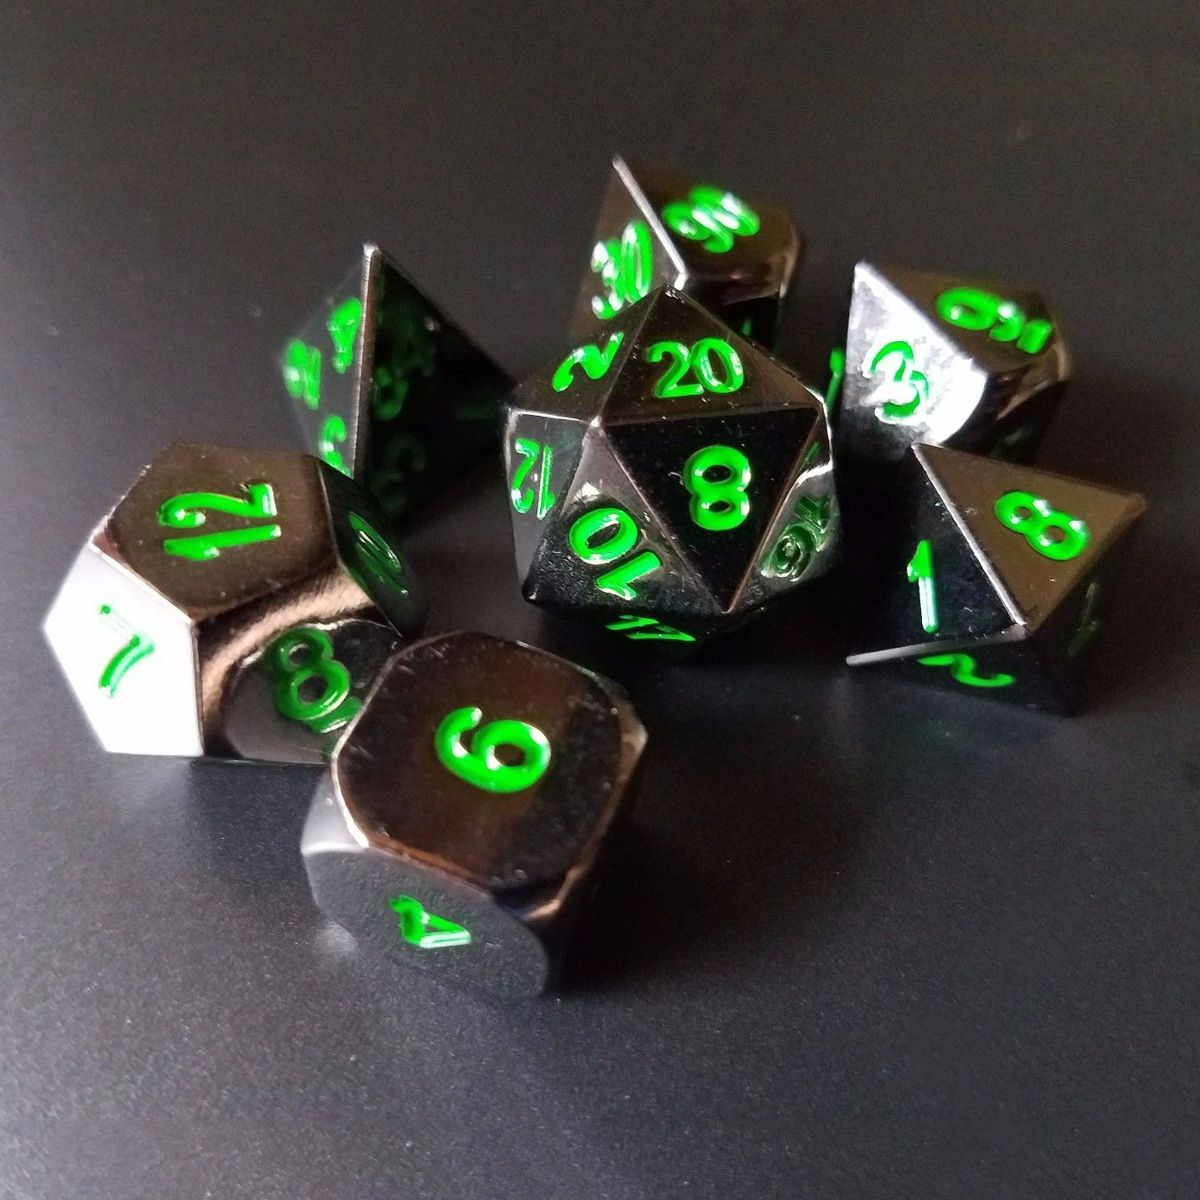 New-Metal-Polyhedral-Dice-with-Bag-Green-Red-7-Piece-Metal-Set-DnD-RPG-1239419